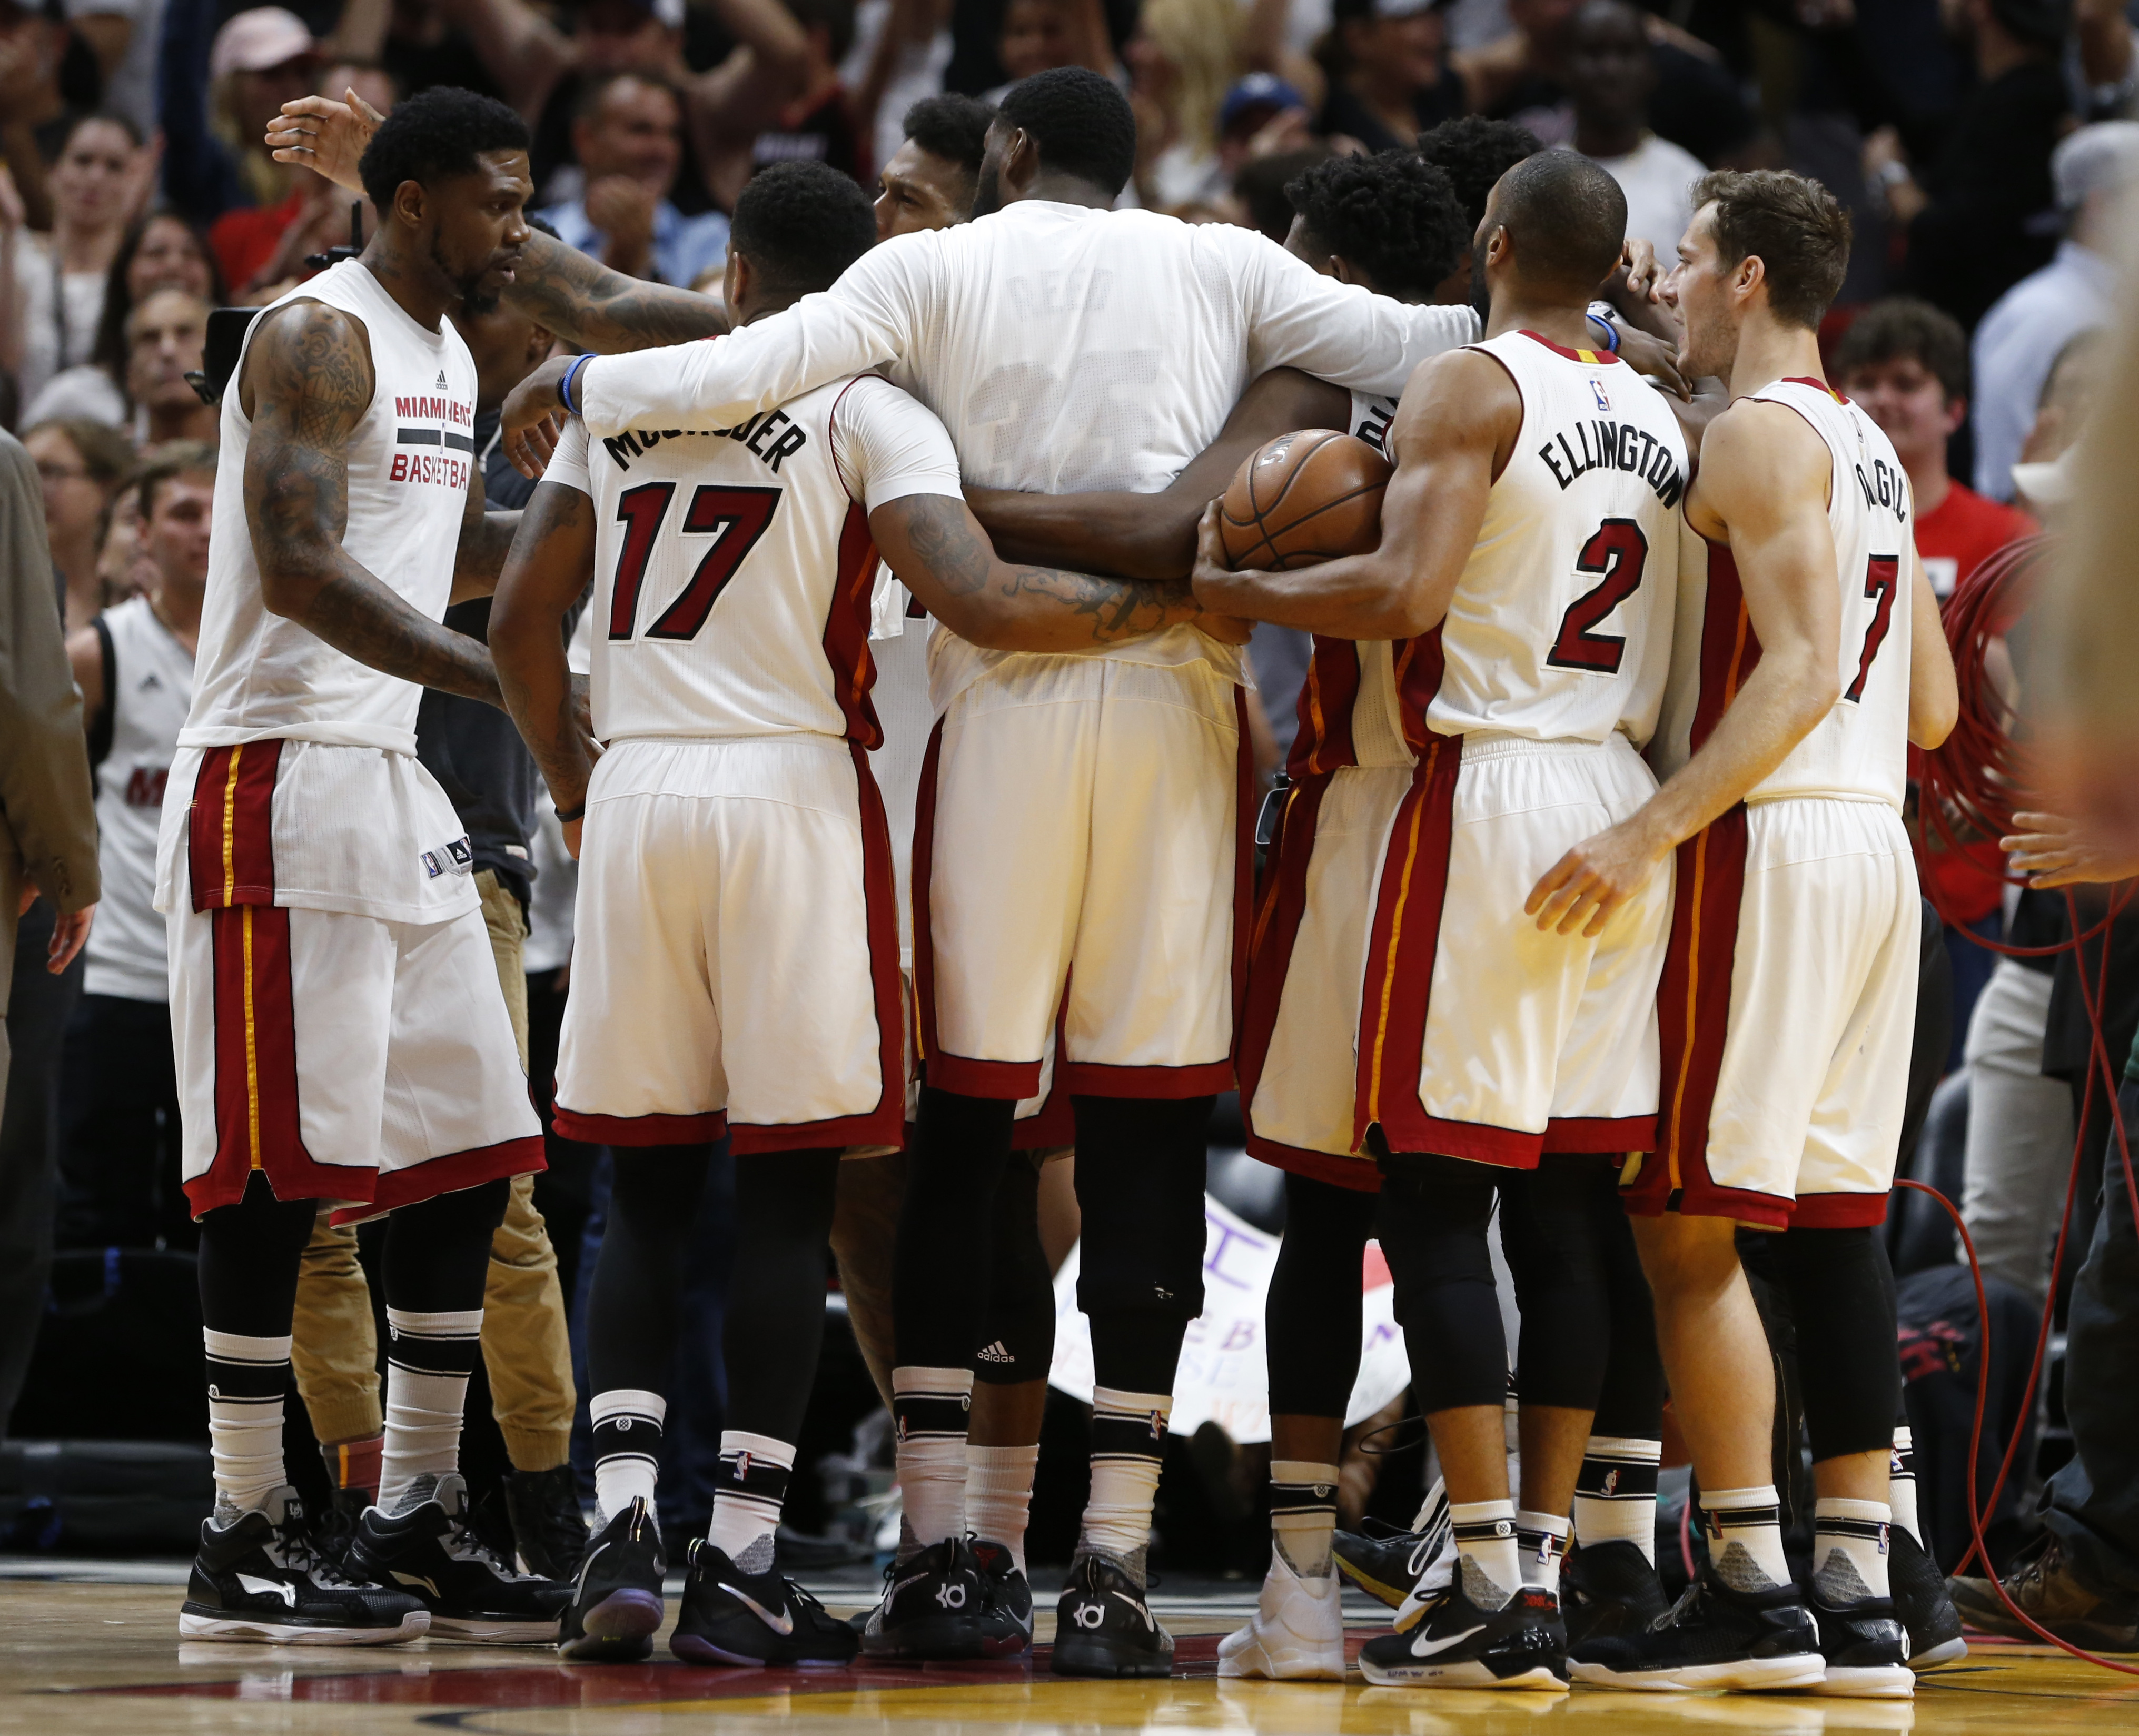 Miami Heat players celebrate after defeating the Cleveland Cavaliers 124-121 in overtime during an NBA basketball game, Monday, April 10, 2017, in Miami. (AP Photo/Wilfredo Lee)